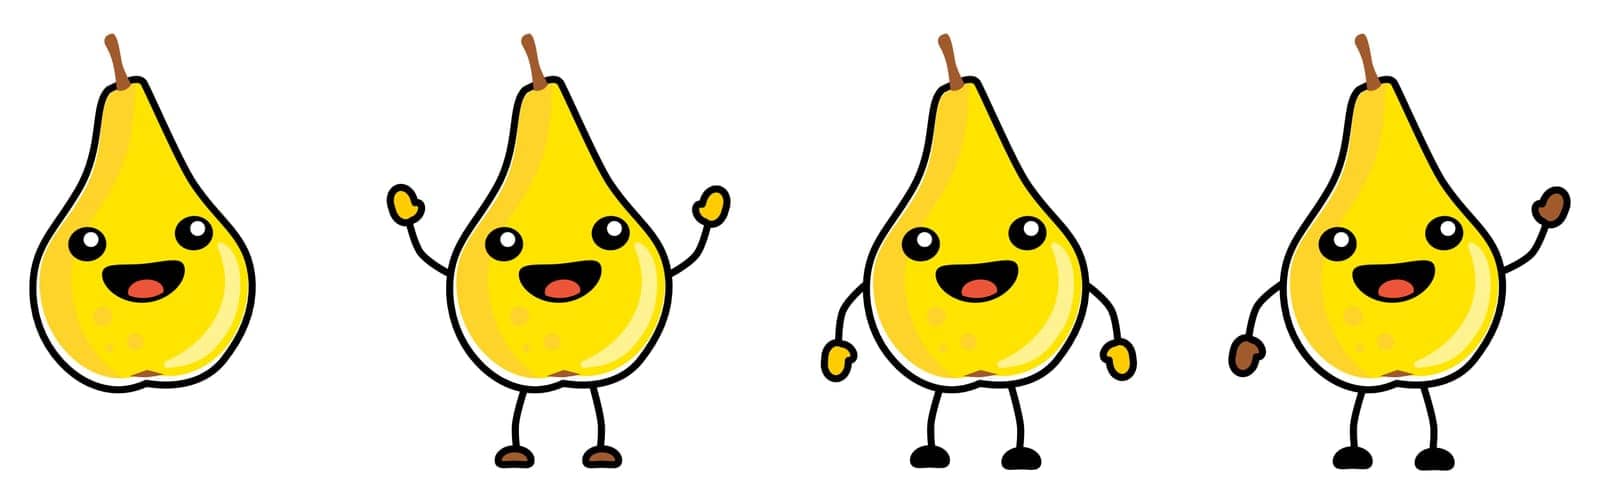 Cute kawaii style Pear fruit icon, outlined, large eyes, smiling with open mouth. Version with hands raised, down and waving